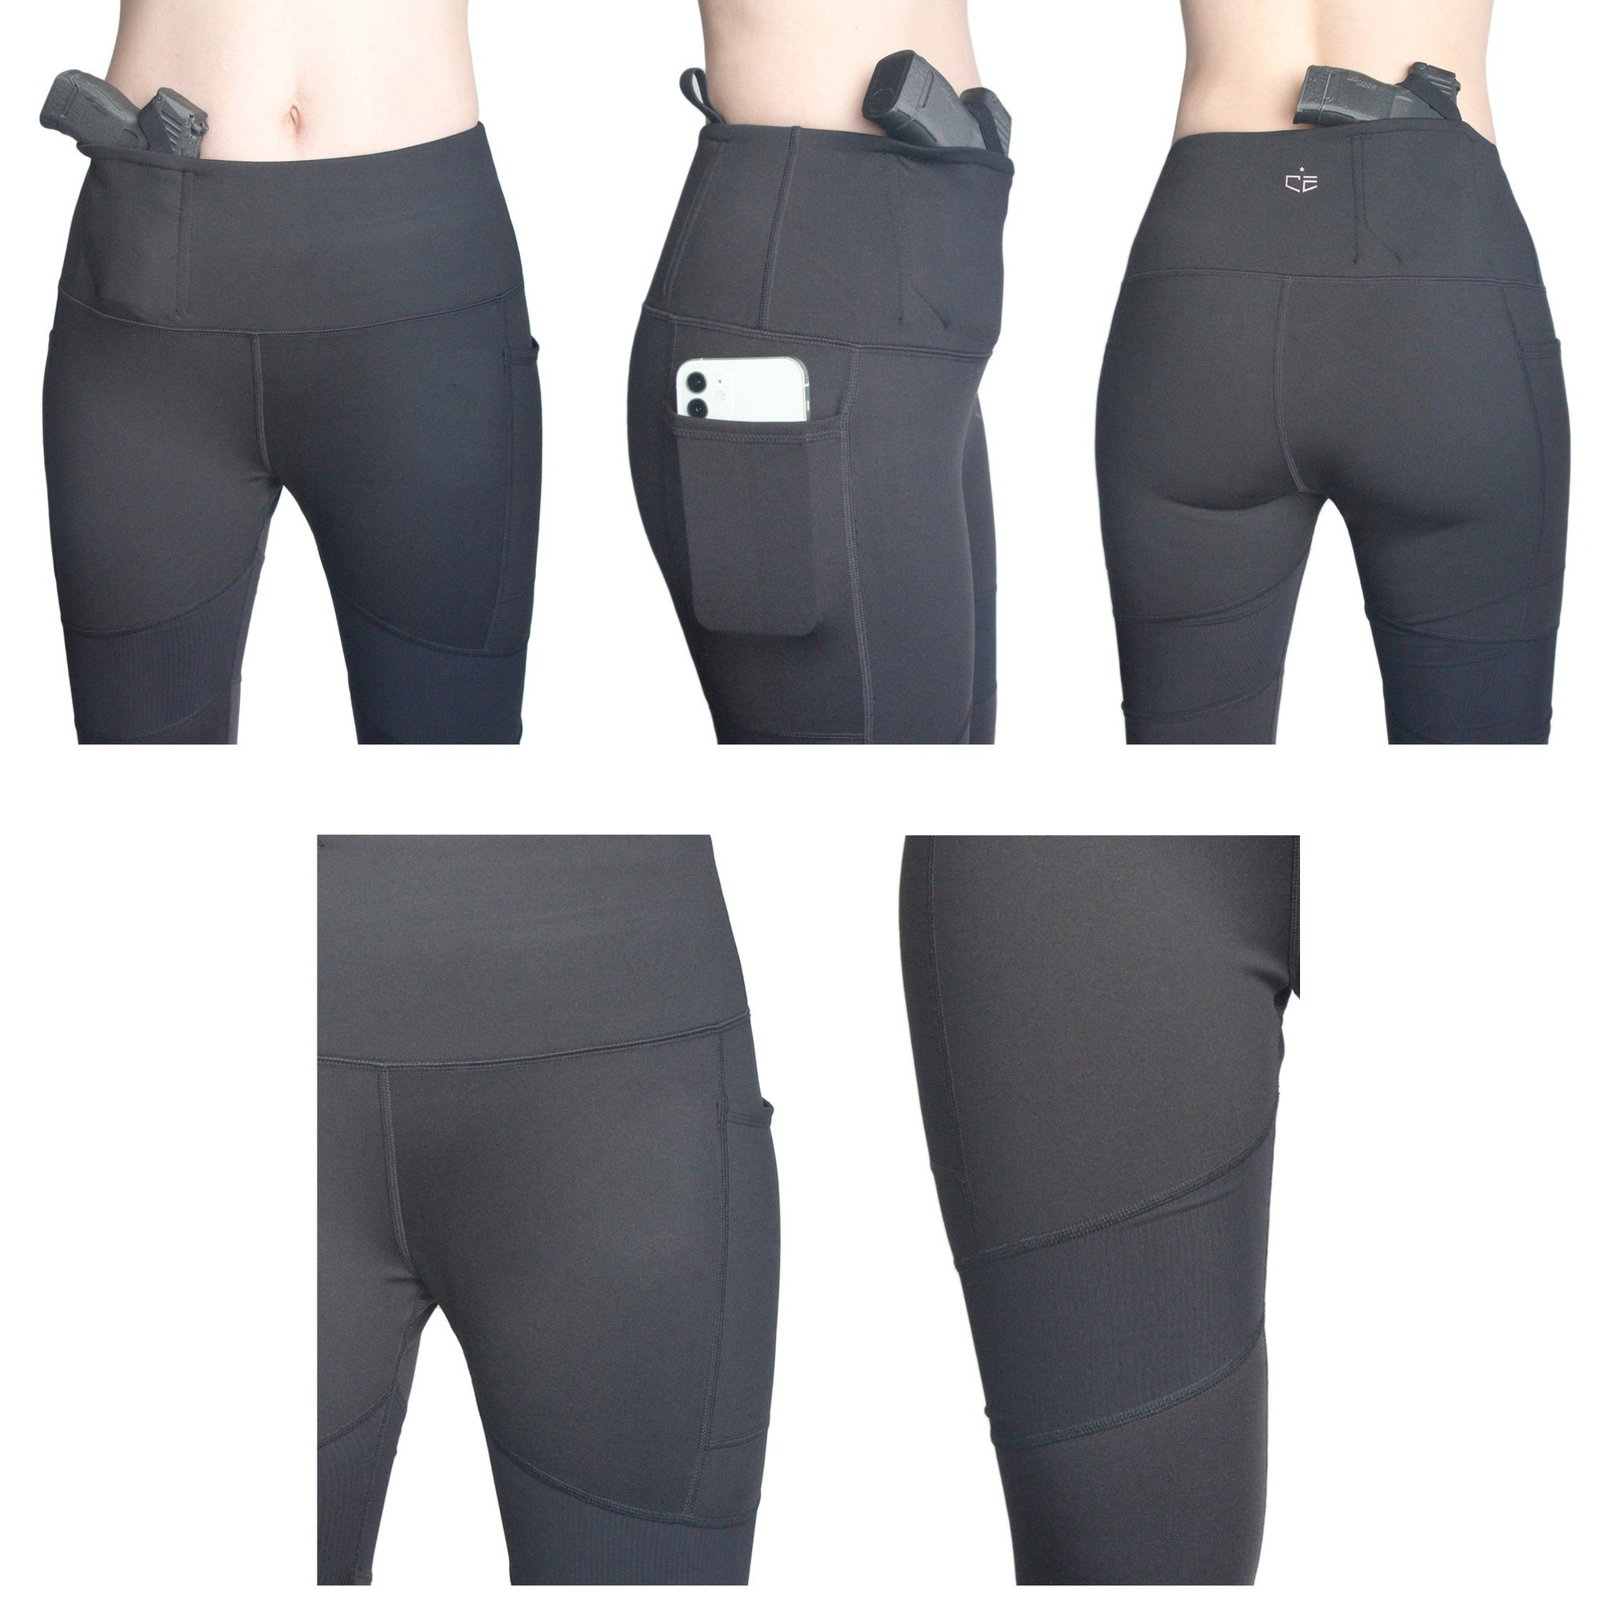 Concealment Express: NEW Product! Concealed Carry Leggings